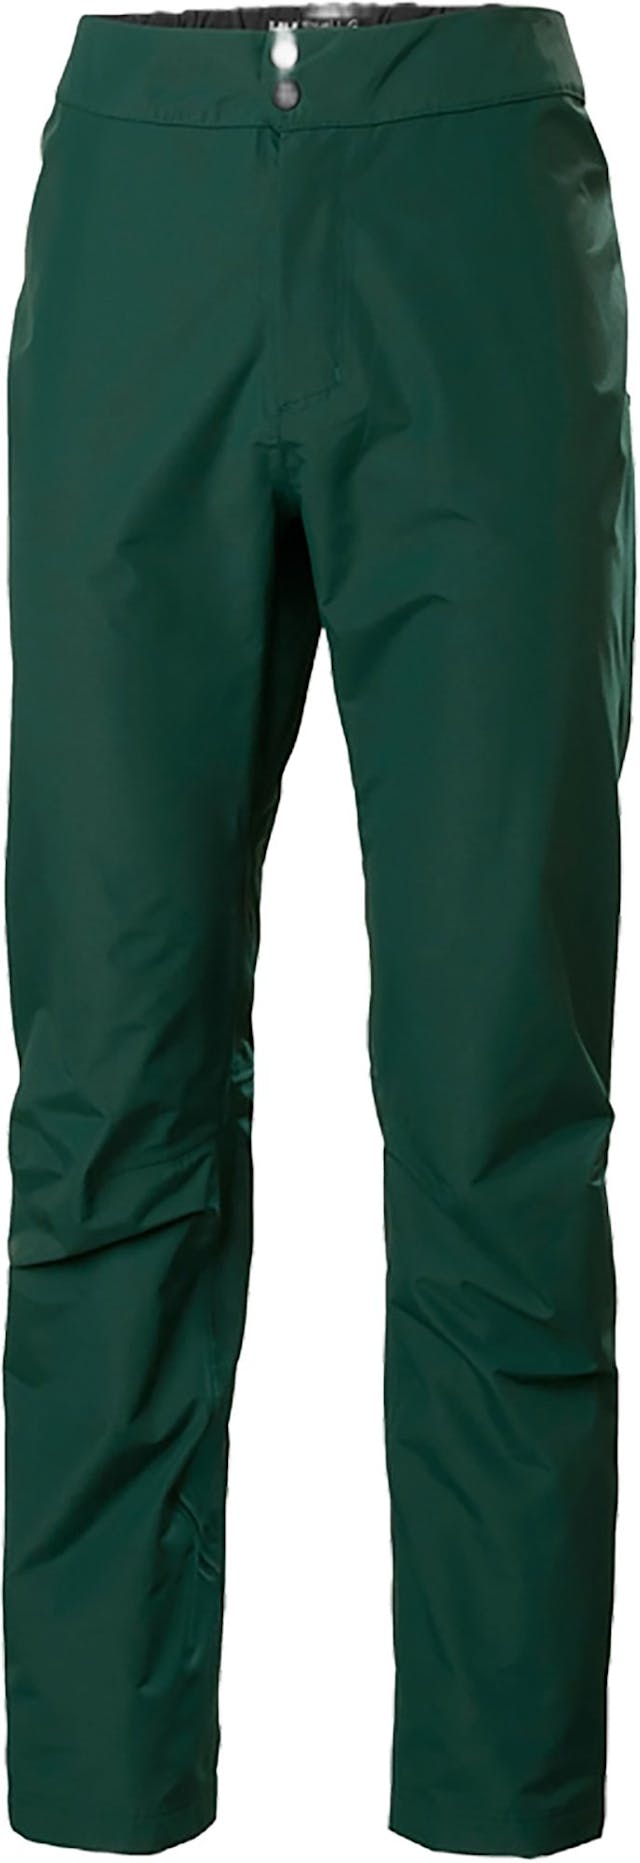 Product image for Blaze 3 Layer Shell Pant - Men's